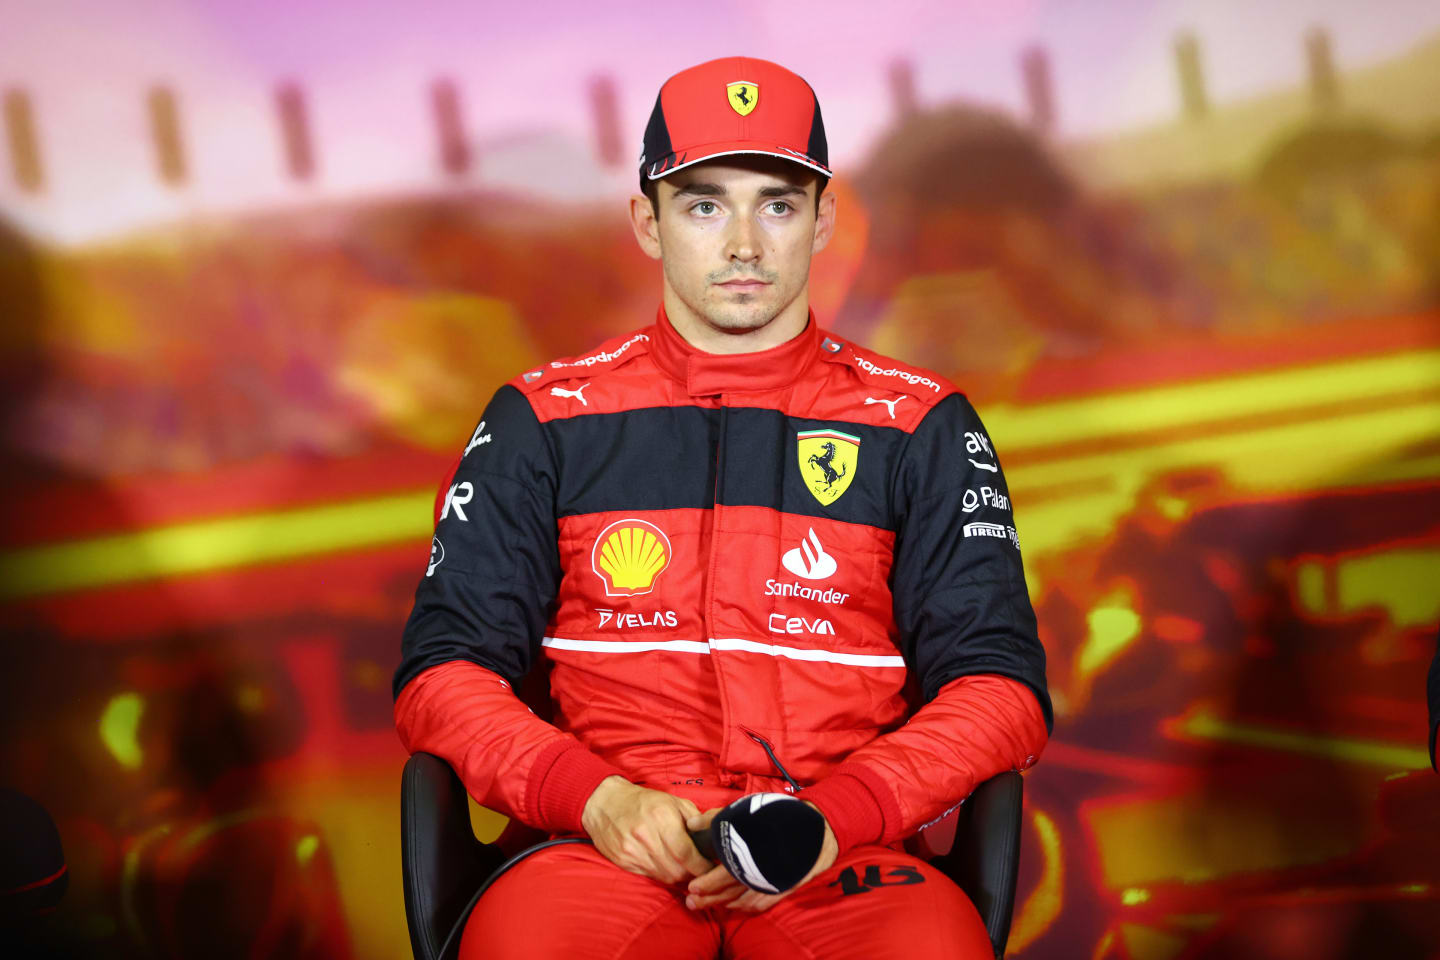 BARCELONA, SPAIN - MAY 21: Pole position qualifier Charles Leclerc of Monaco and Ferrari talks in the press conference after qualifying ahead of the F1 Grand Prix of Spain at Circuit de Barcelona-Catalunya on May 21, 2022 in Barcelona, Spain. (Photo by Dan Istitene - Formula 1/Formula 1 via Getty Images)